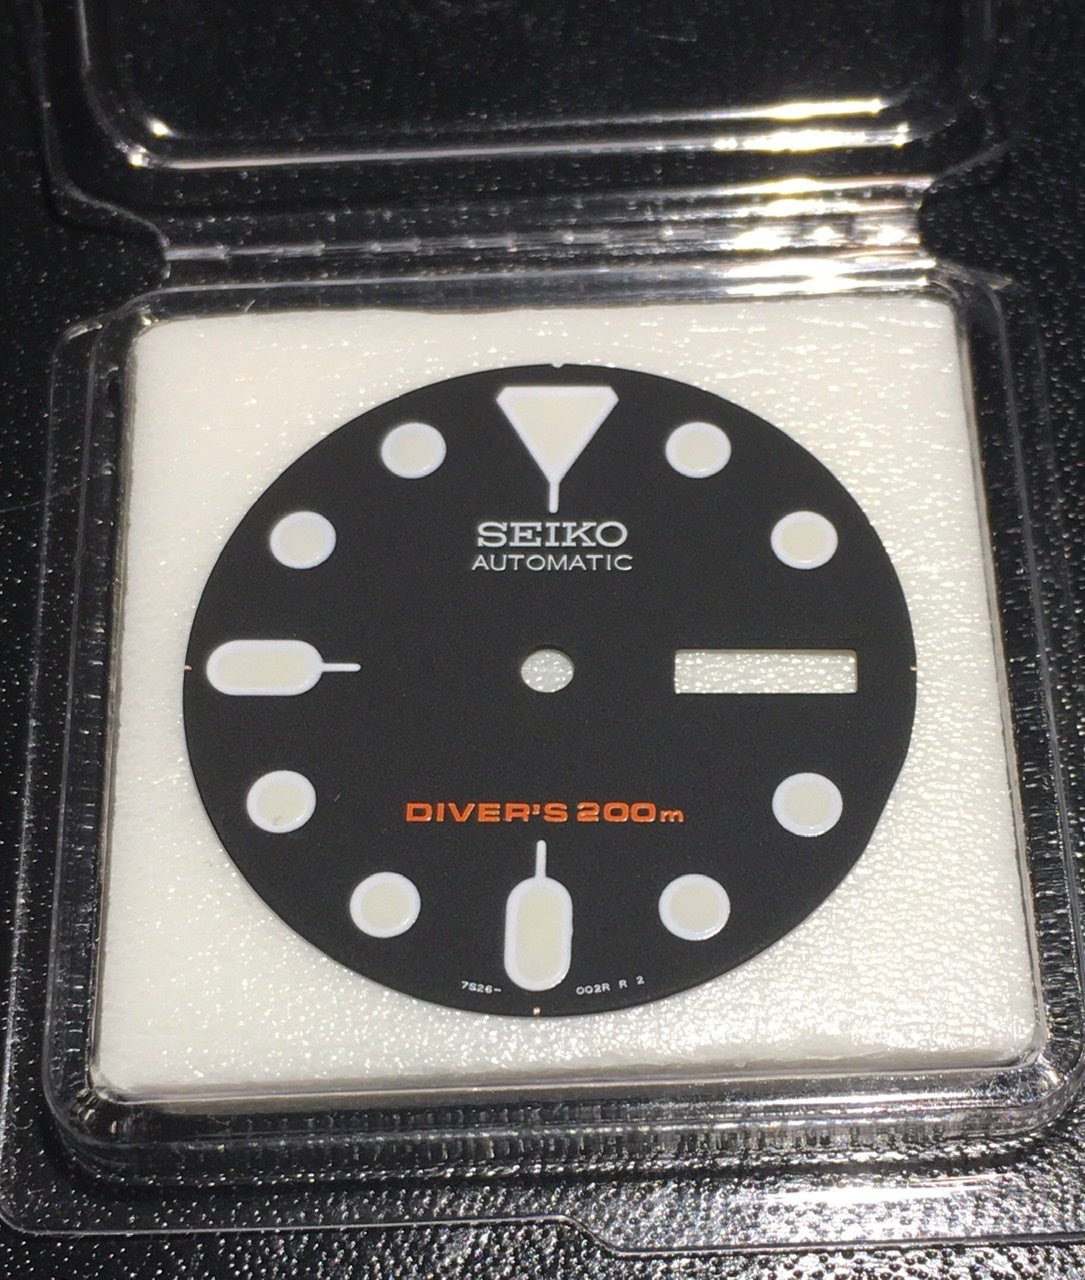 SOLD OUT: Seiko SKX007 Dials - $40 each | The Watch Site